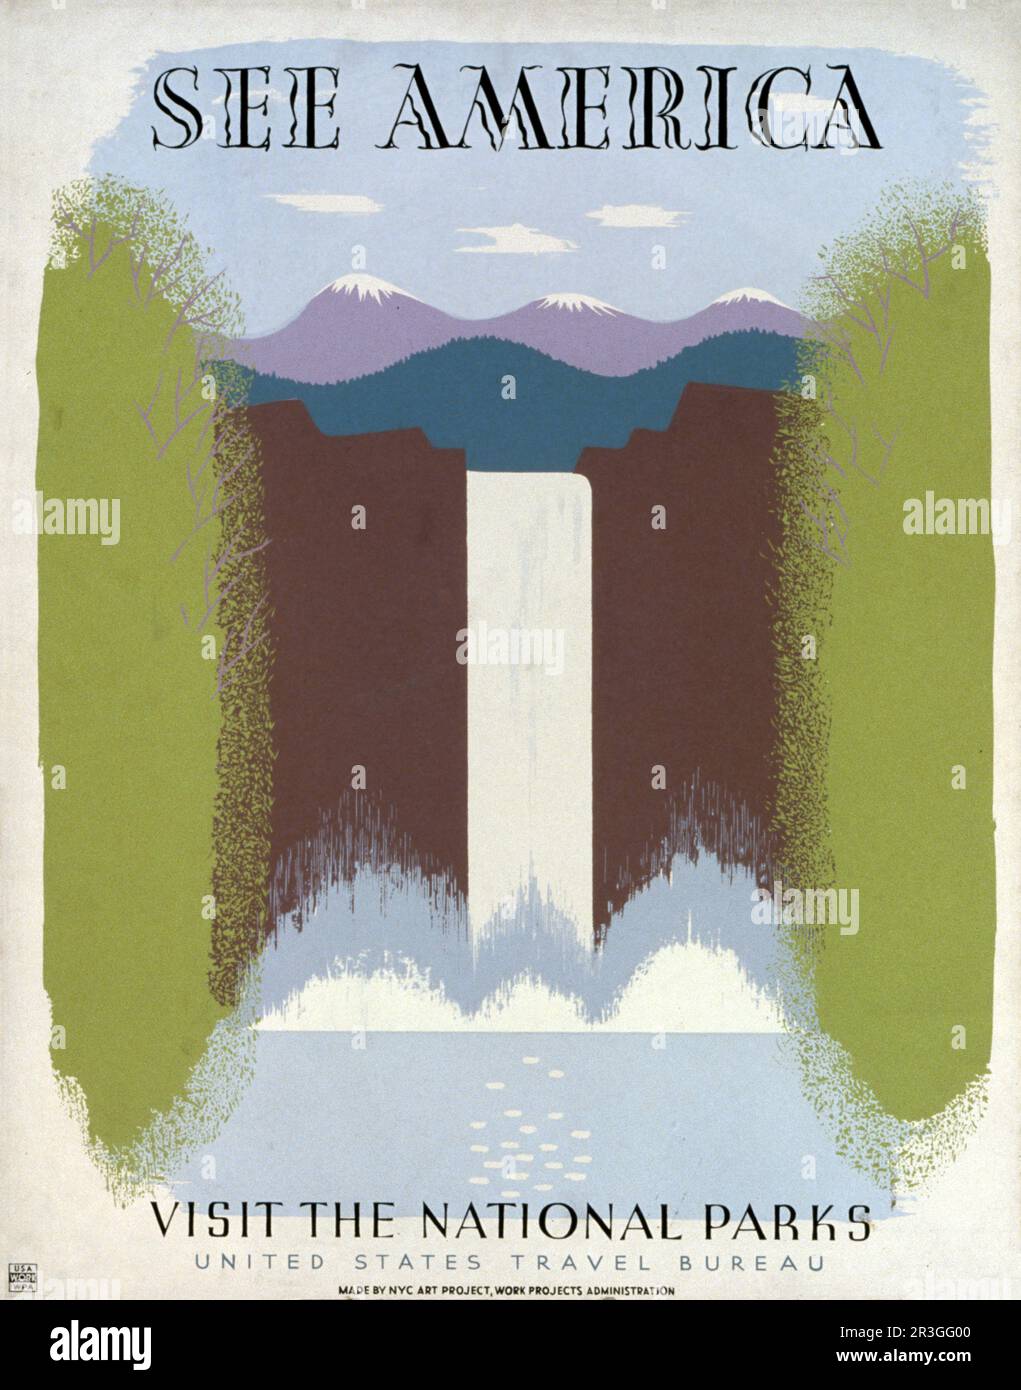 Vintage 1936 poster for United States Travel Bureau promoting travel to national parks. Stock Photo